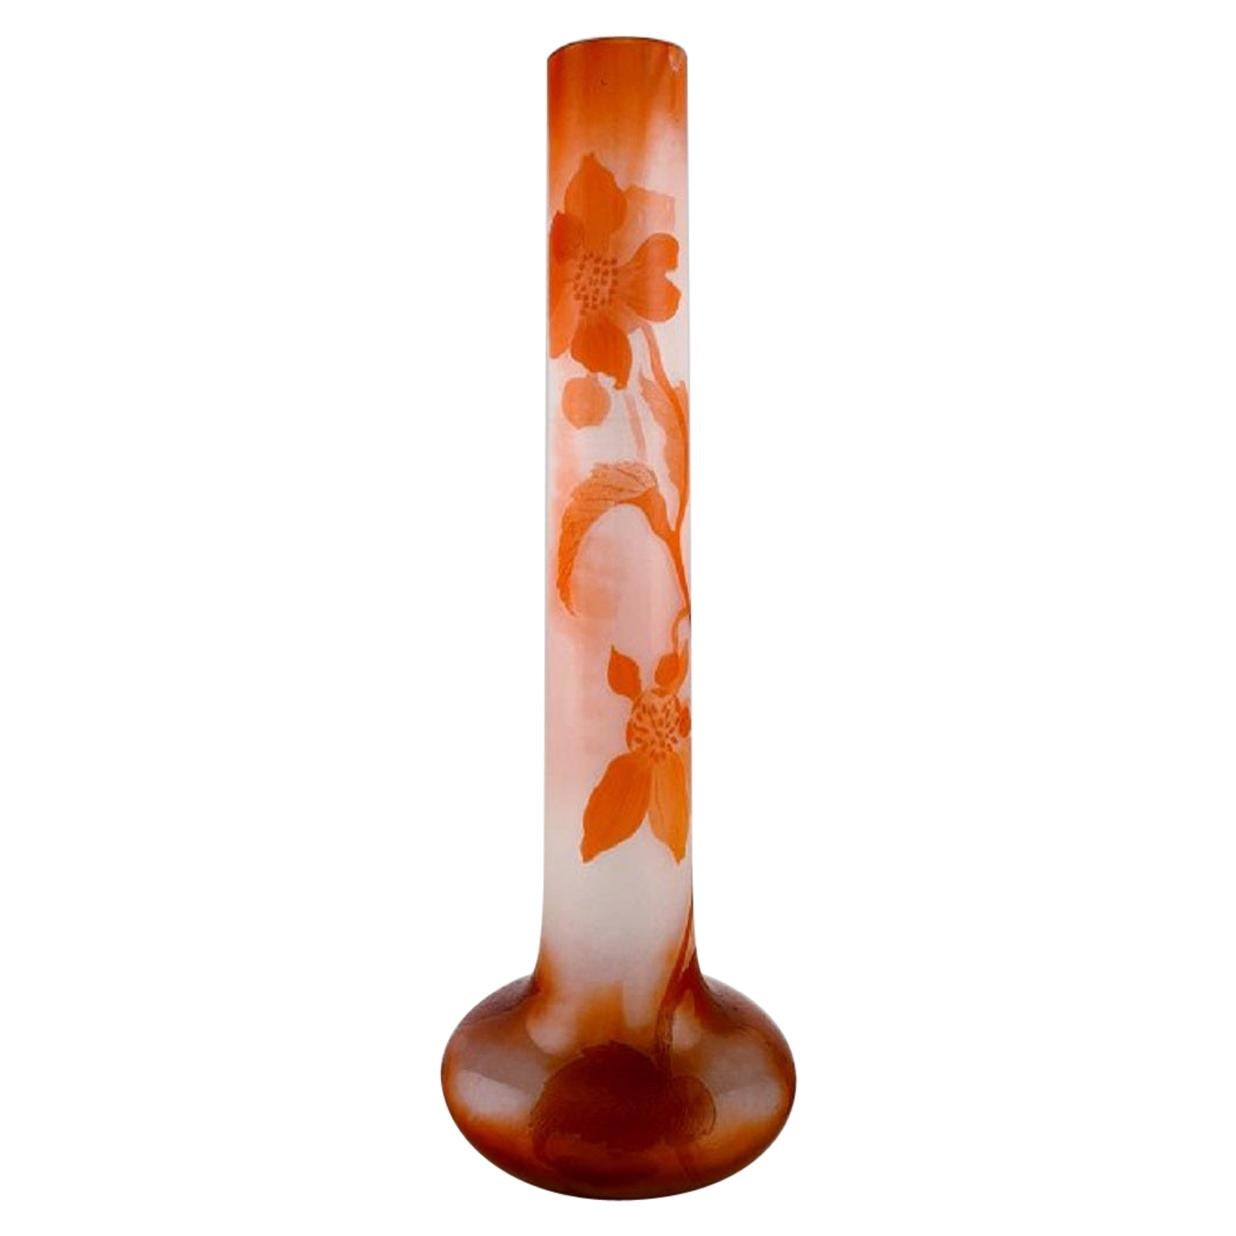 Colossal Antique Emile Gallé Vase in Frosted and Orange Art Glass, 1890s For Sale